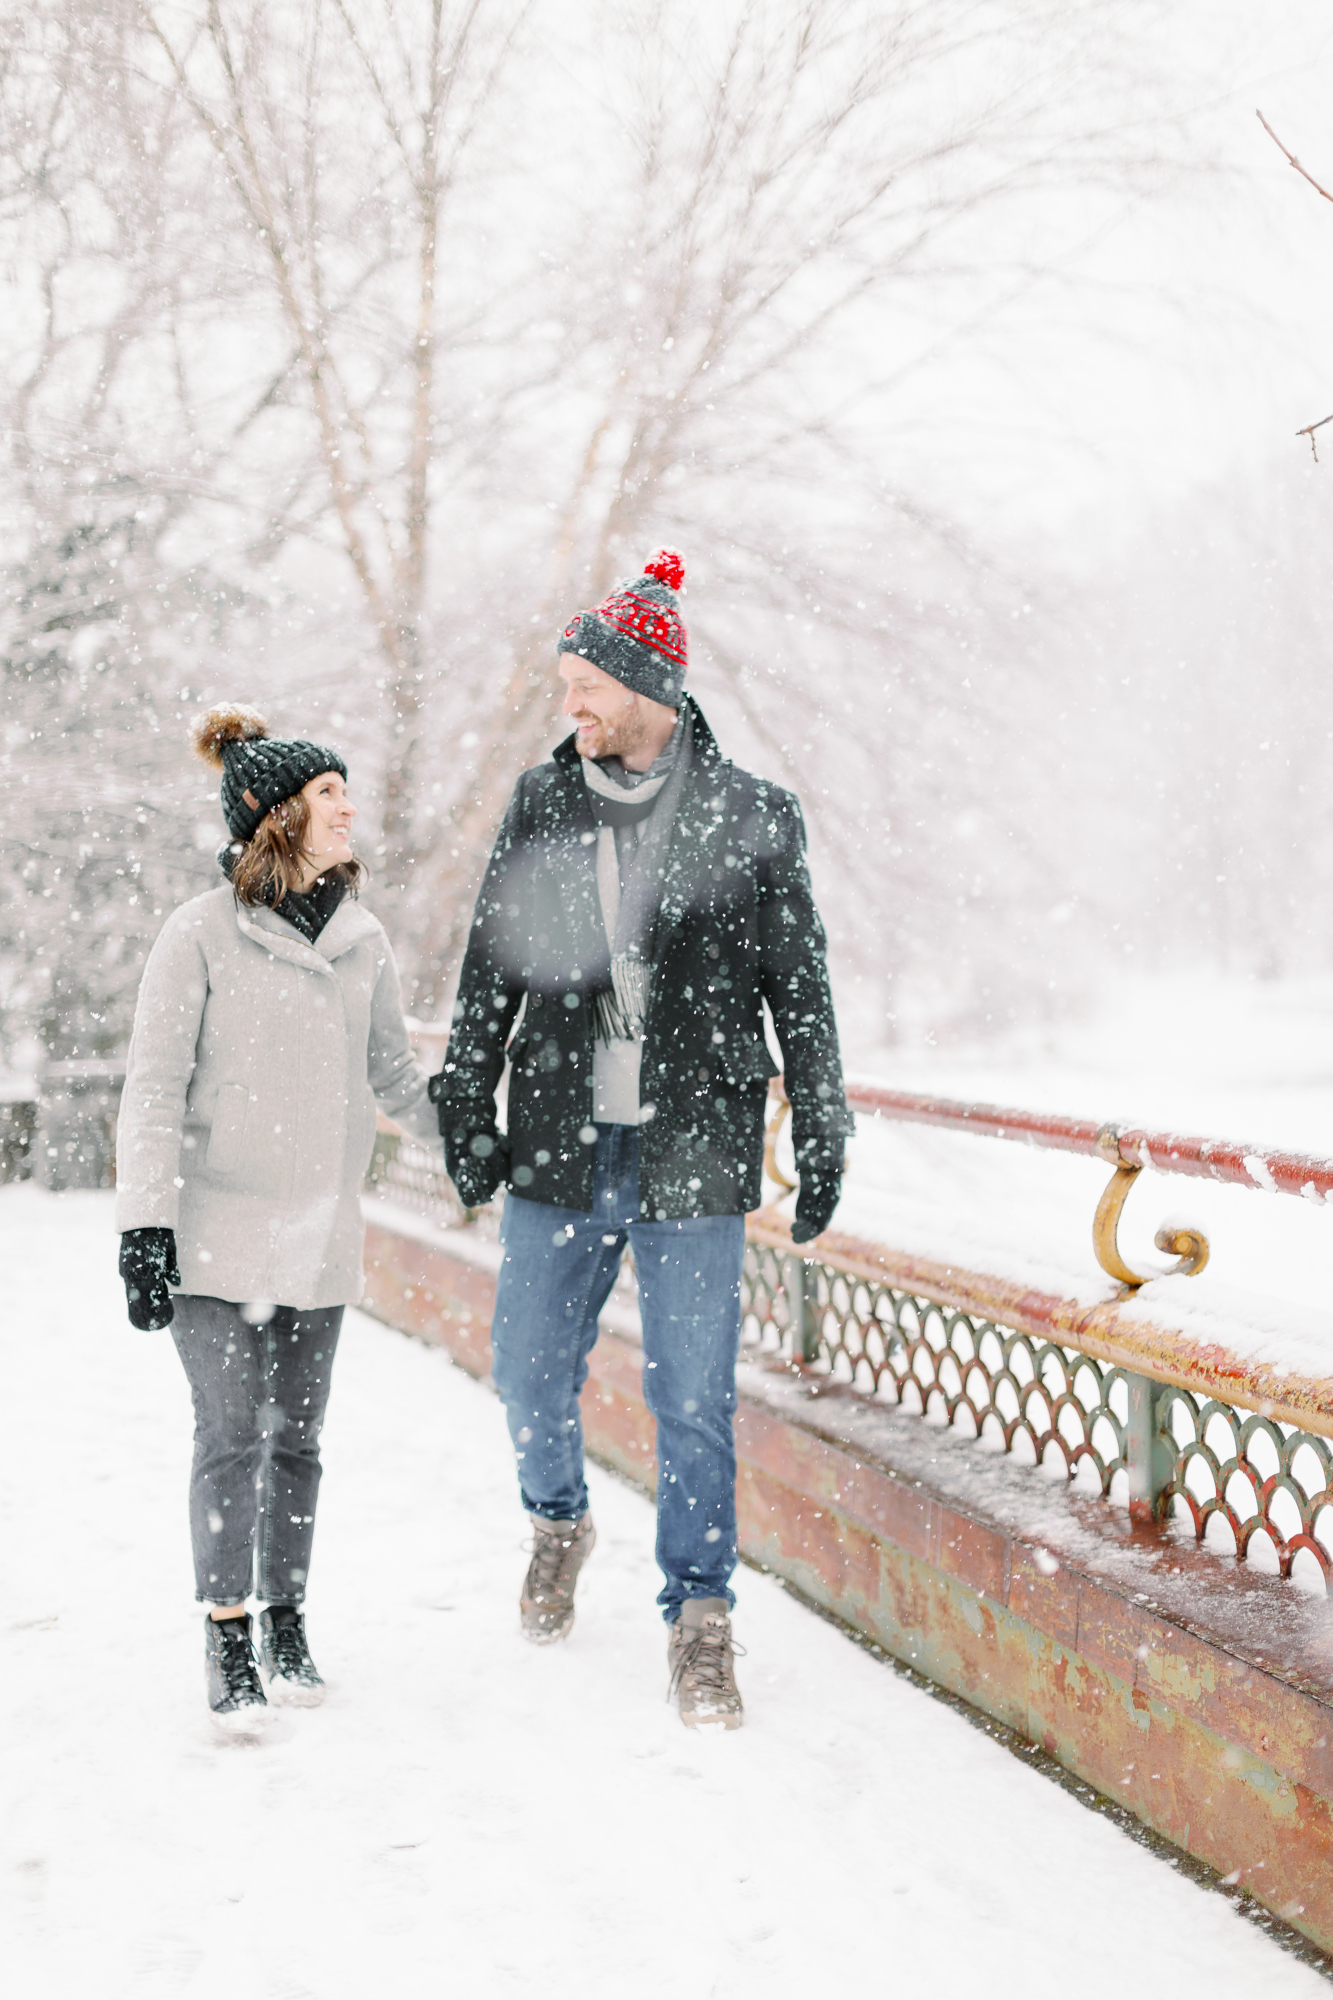 Picturesque and Snowy Engagement Photos in Prospect Park